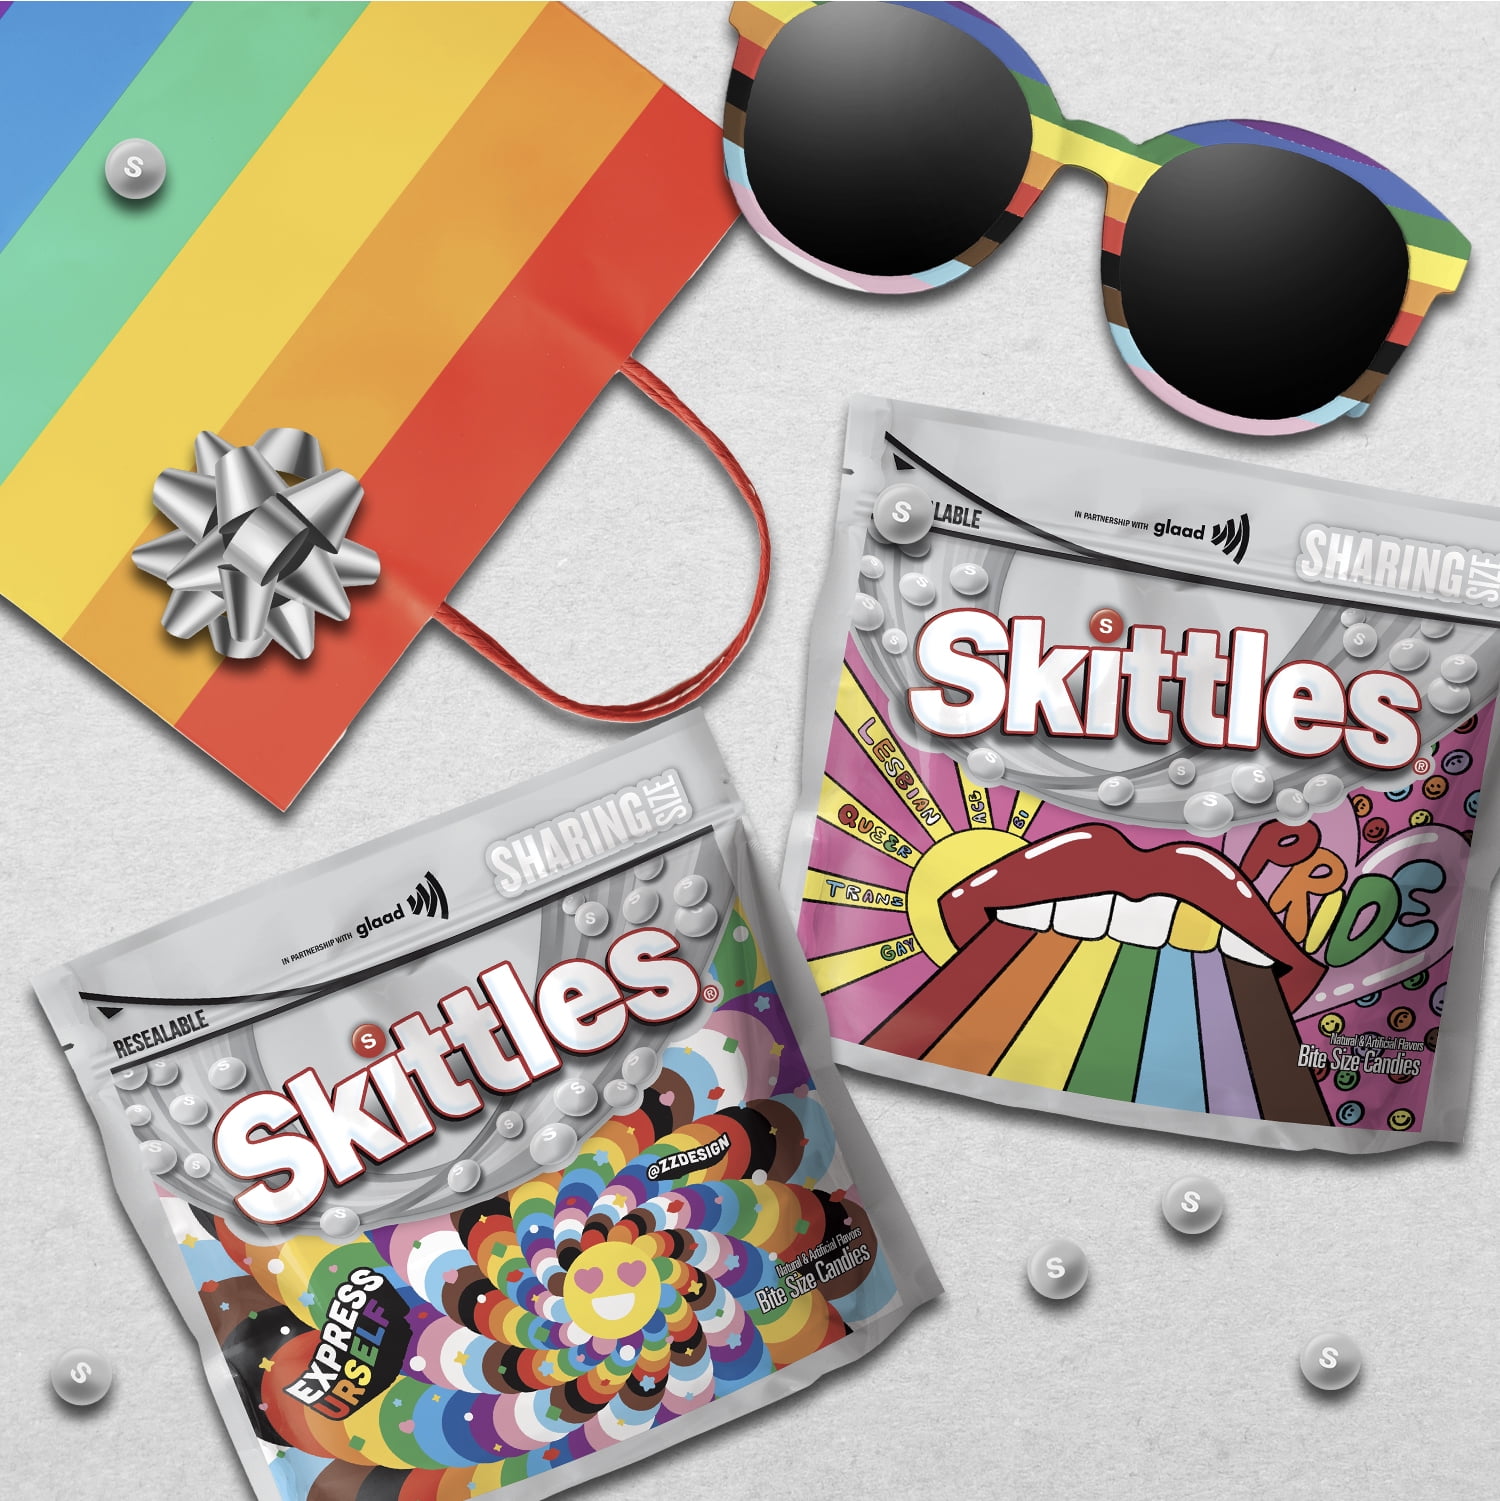 Skittles Original Chewy Candy Limited Edition Pride Pack, Sharing Size Bag  - 15.5oz 